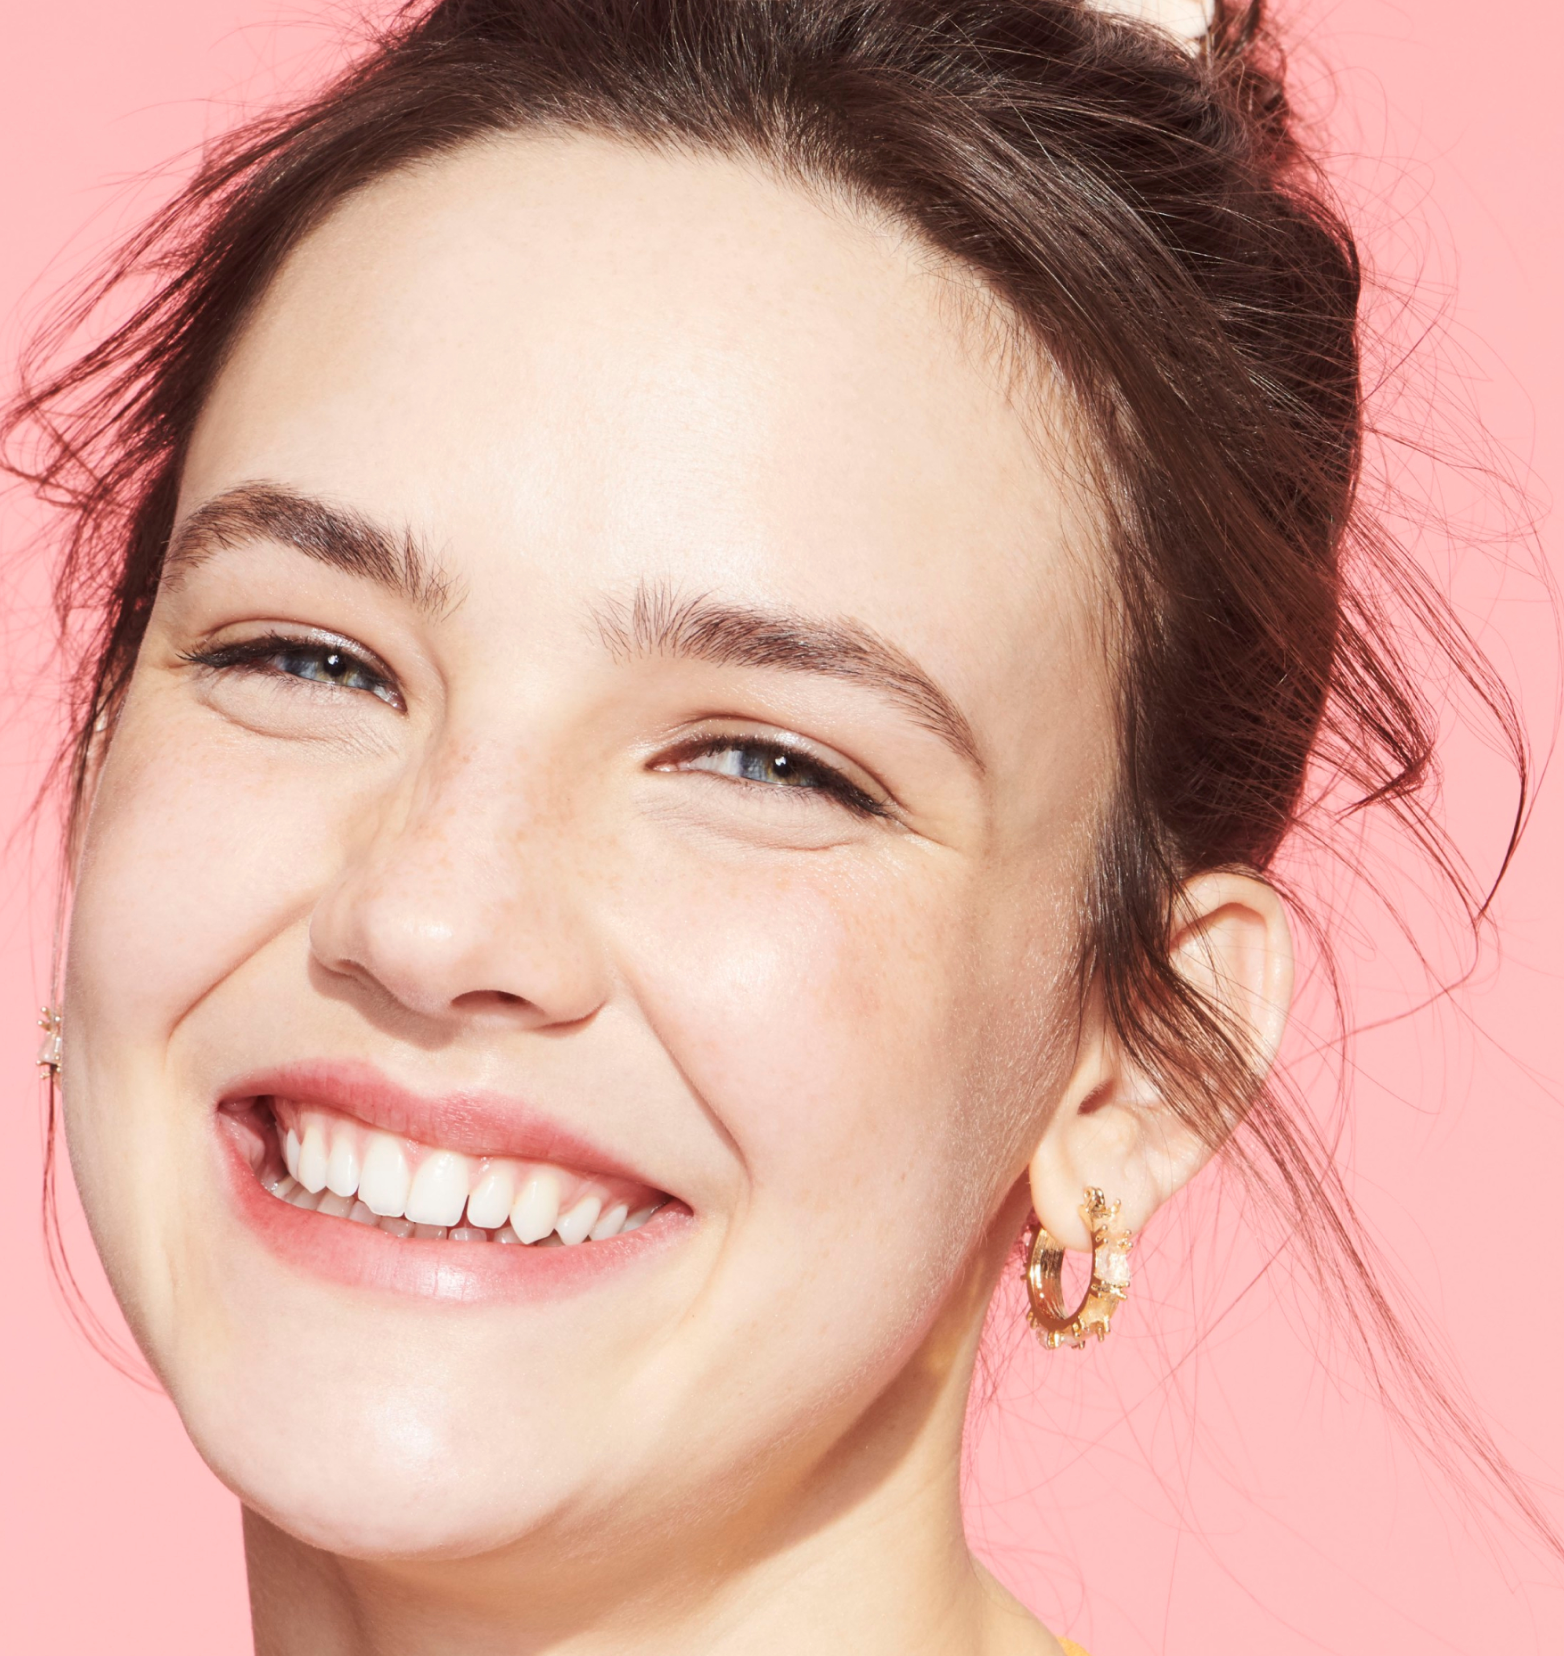 A brunette model looking right at the viewer, smiling with her perfectly white and healthy teeth